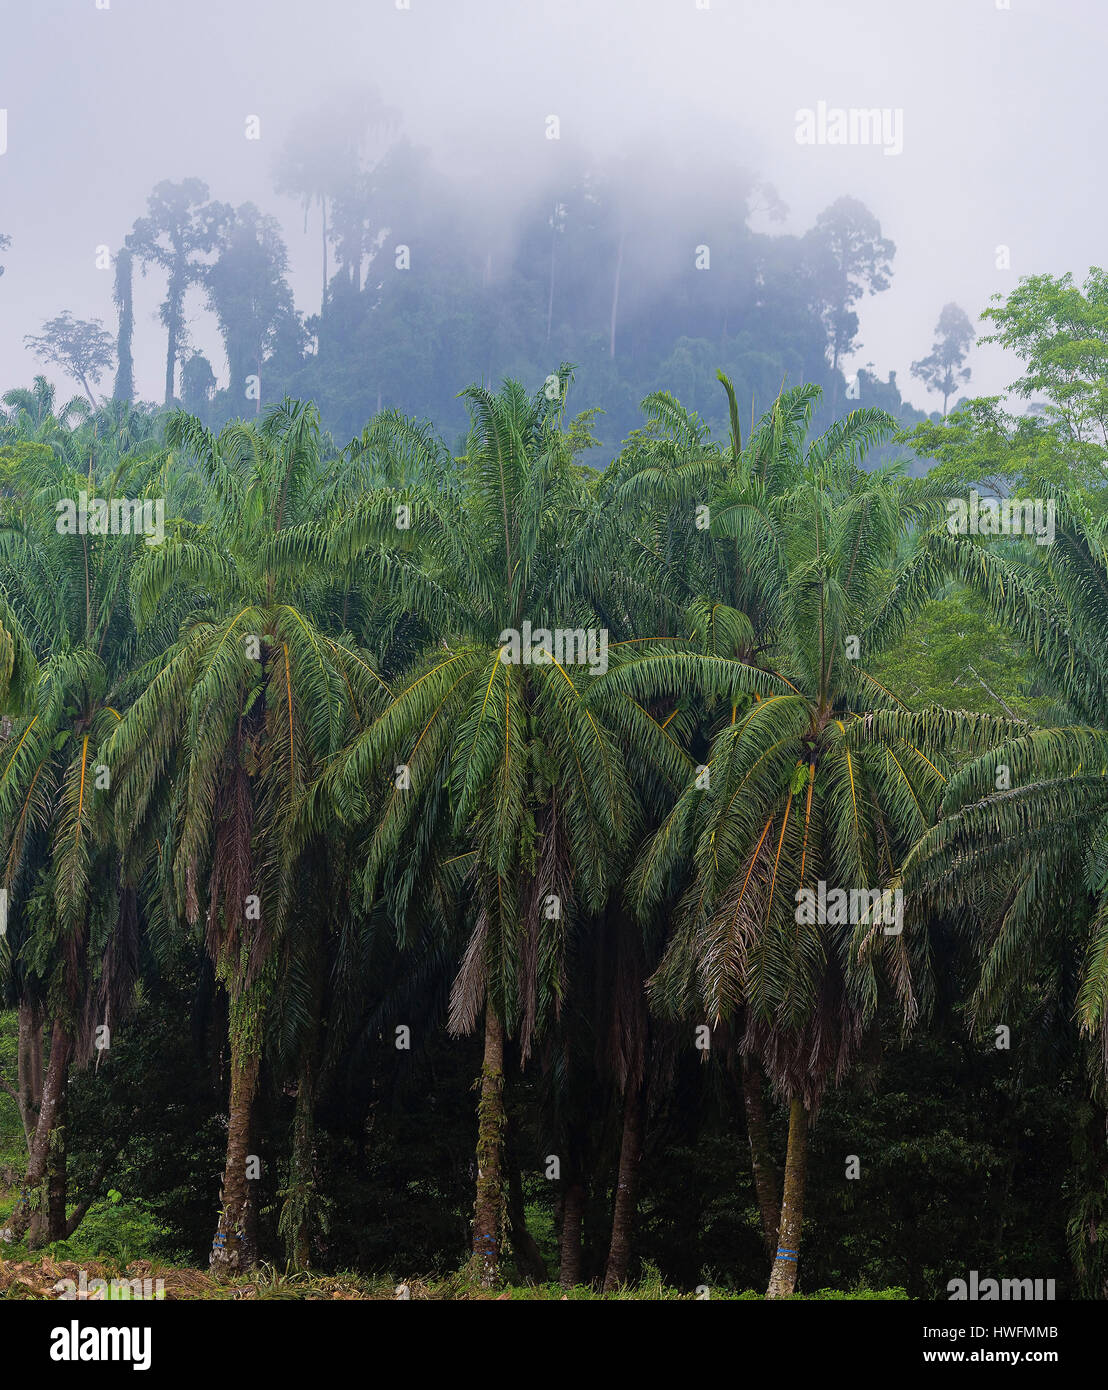 African oil palms (Elaeis guineensis) growing in front of primary rainforest in Tabin, Sabah, Borneo. Stock Photo